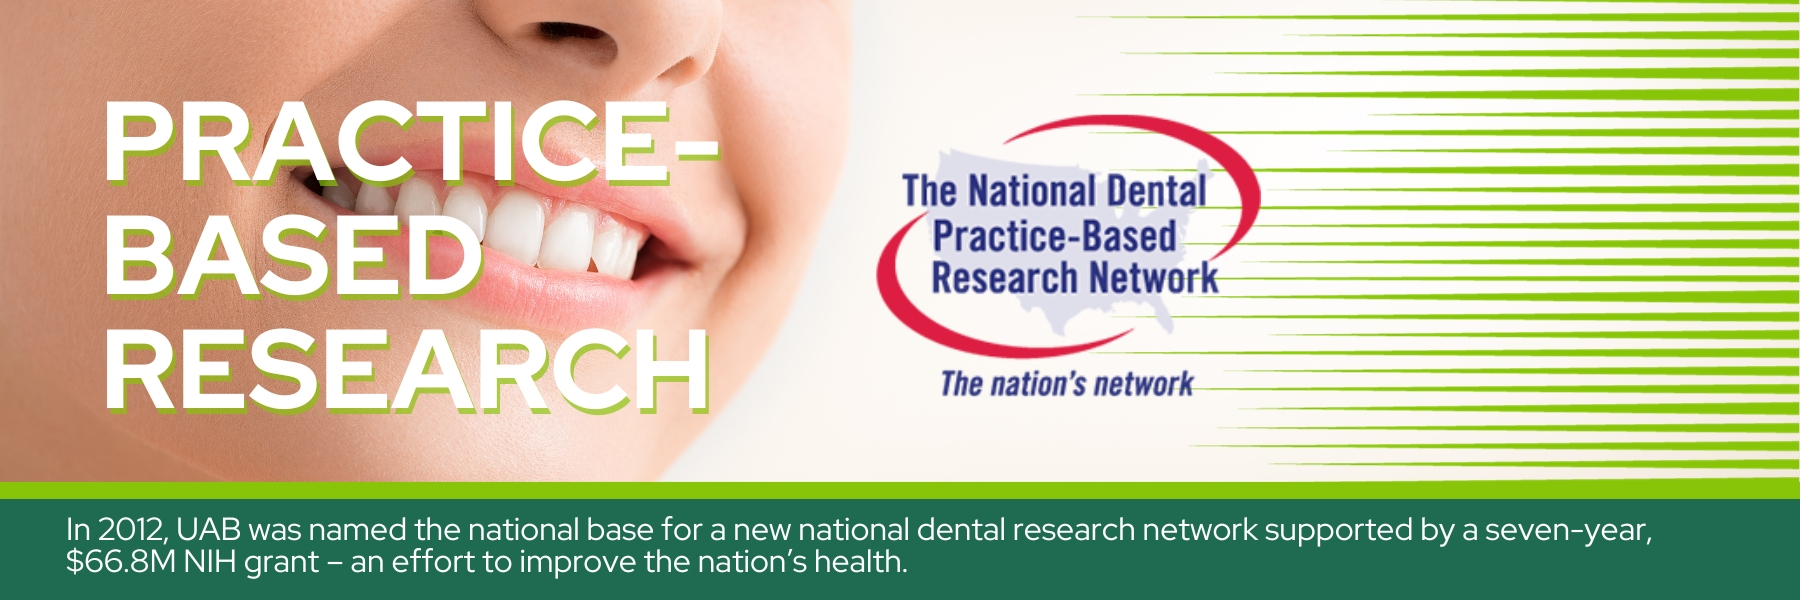 Practice-based research - In 2012, UAB was named the national base for a new national dental research network supported by a seven-year, $66.8M NIH grant – an effort to improve the nation’s health.